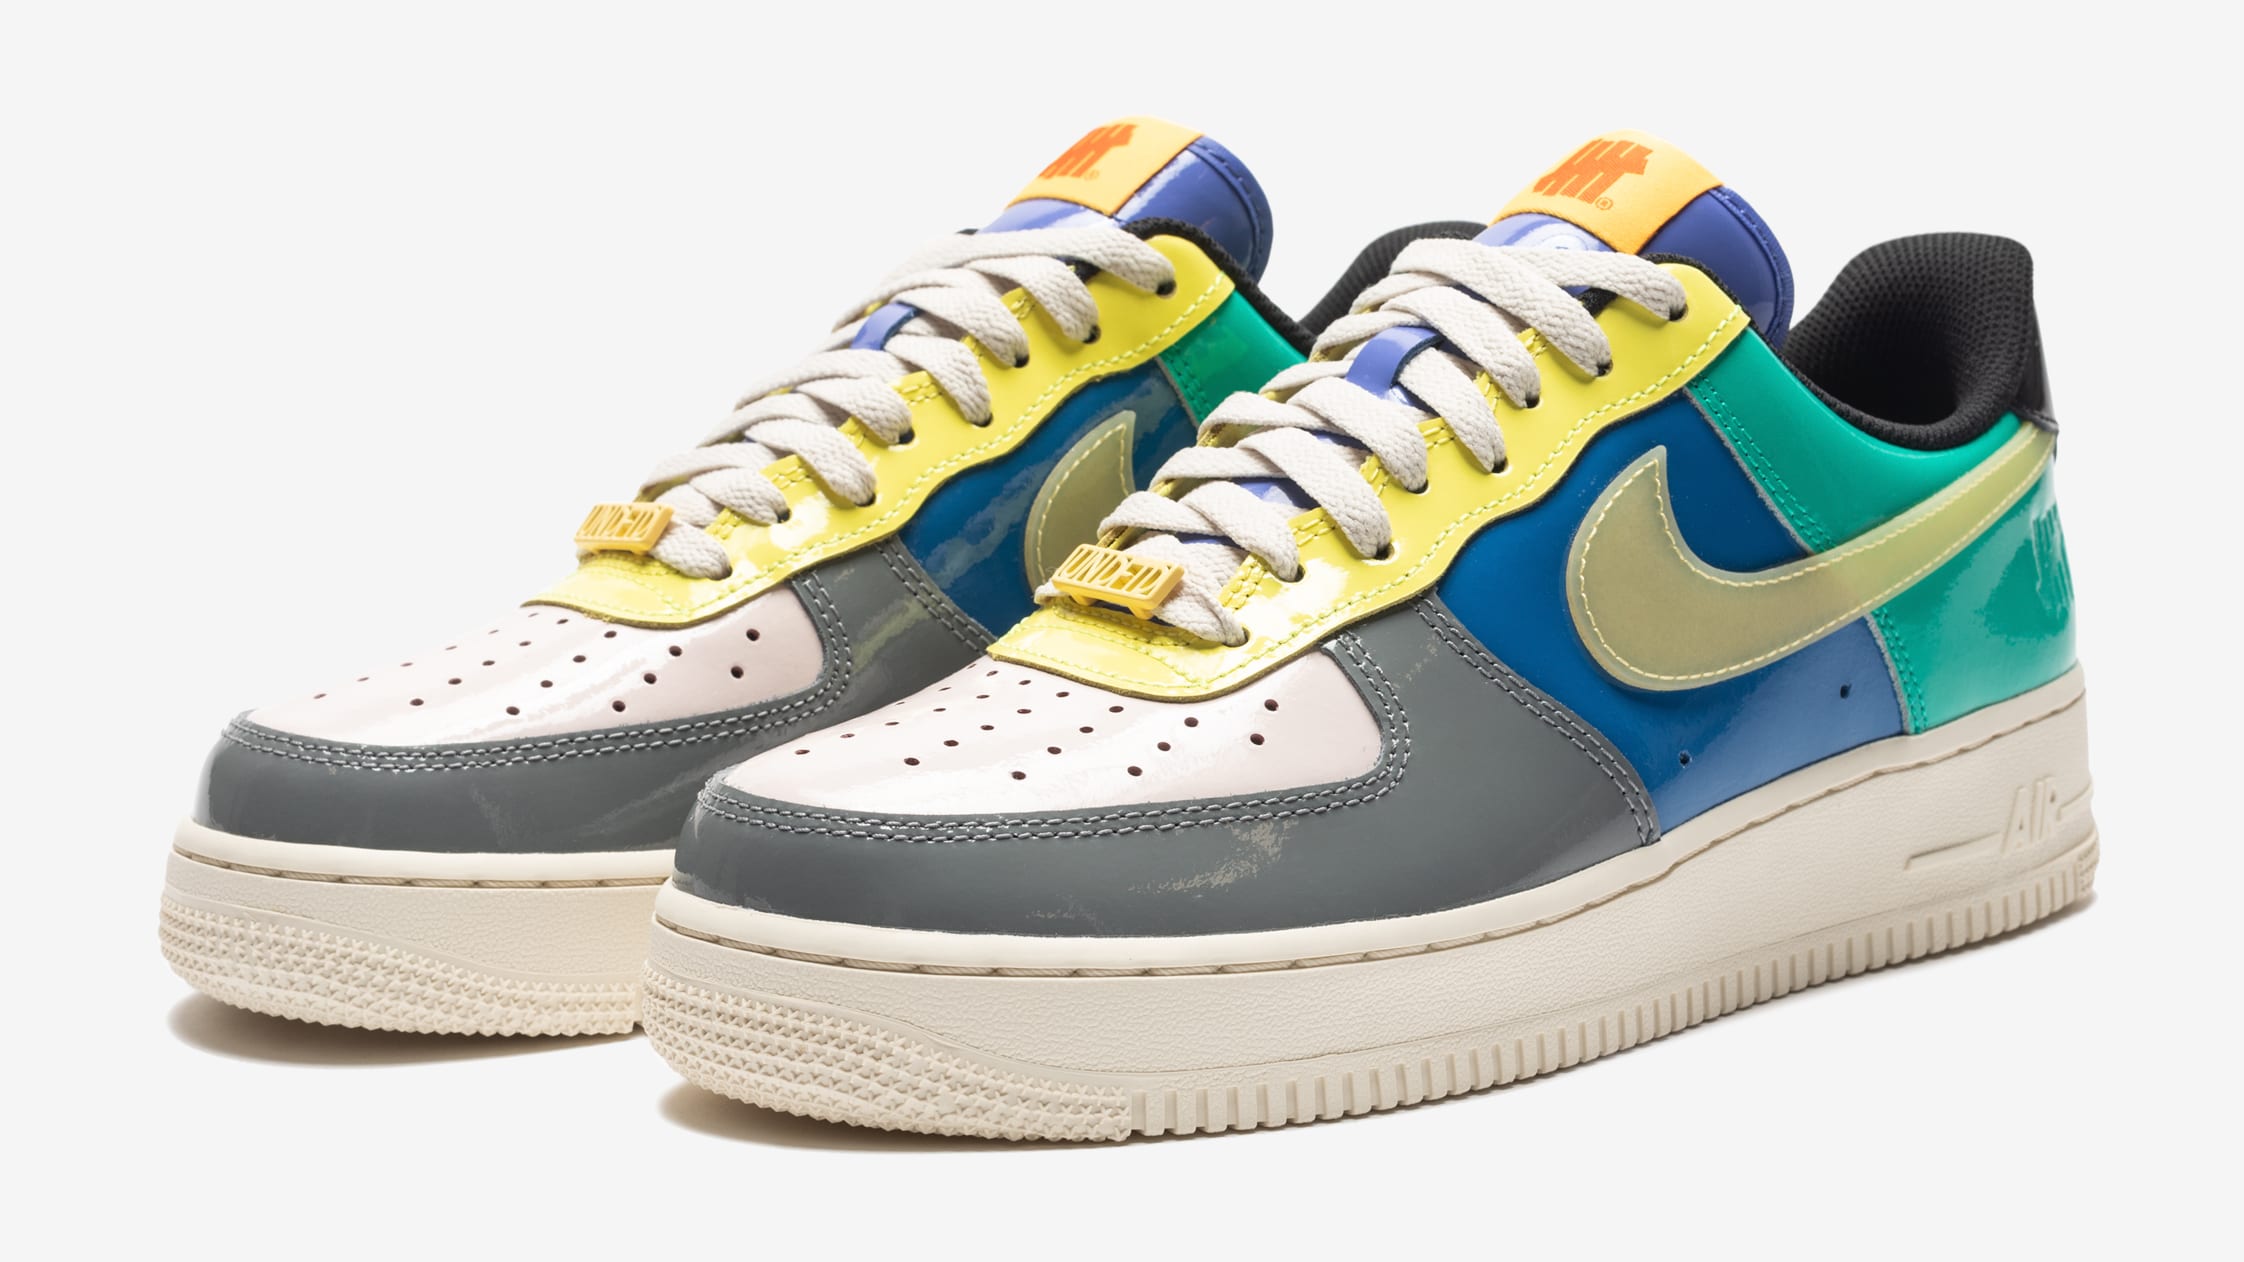 Undefeated x Nike Air Force 1 Low Topaz Gold DV5255-001 Pair